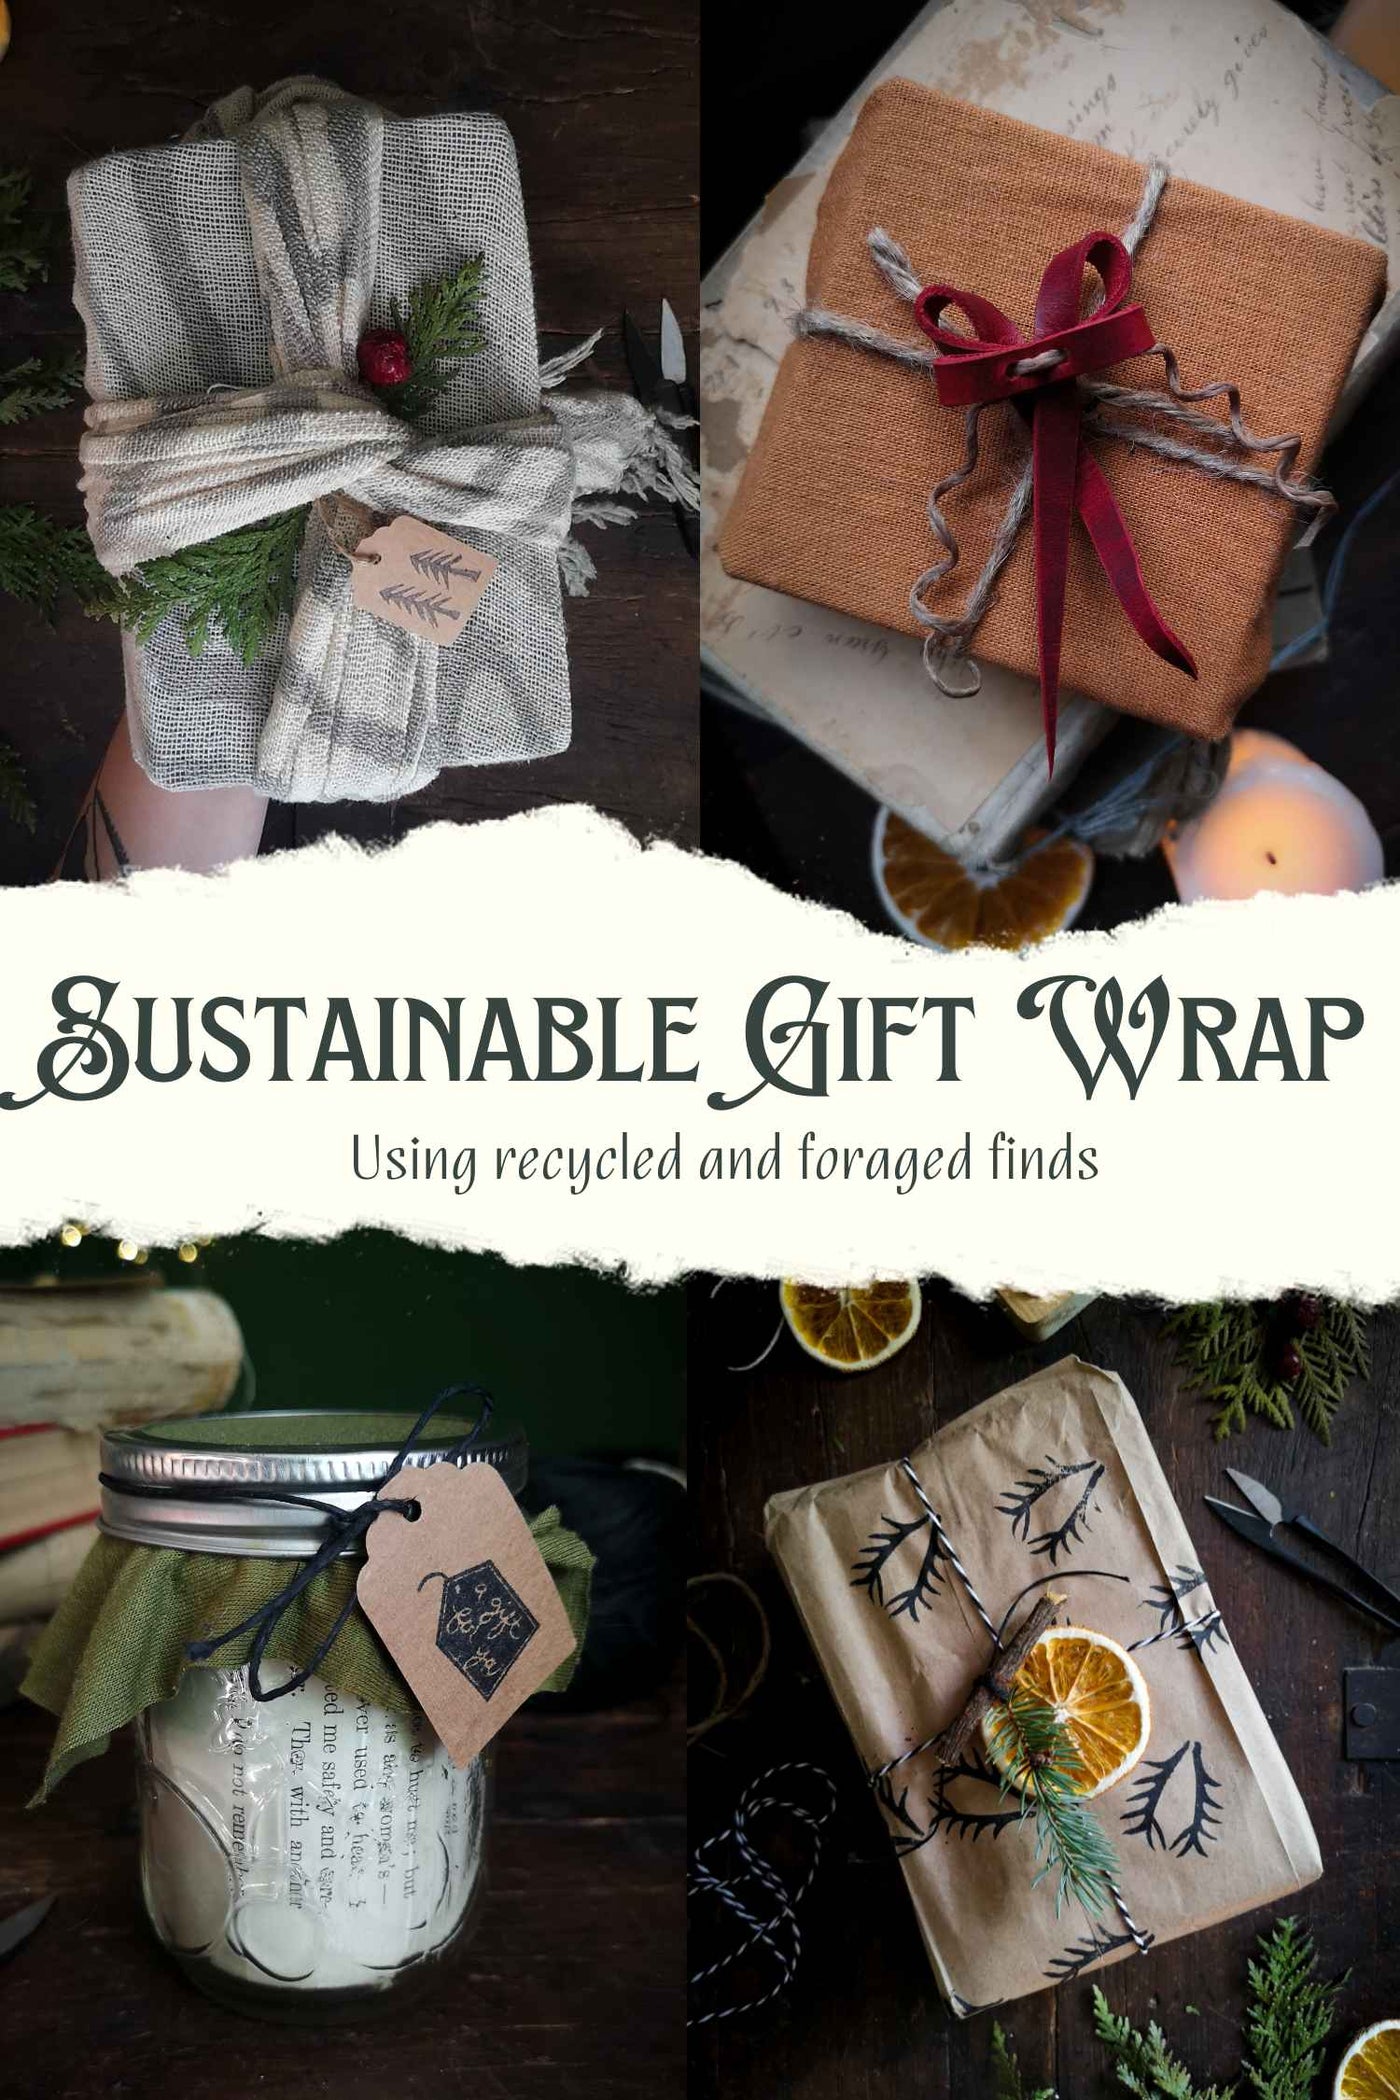 Sustainable Gift Wrap Solutions Using Recycled and Foraged Finds - Hammerthreads